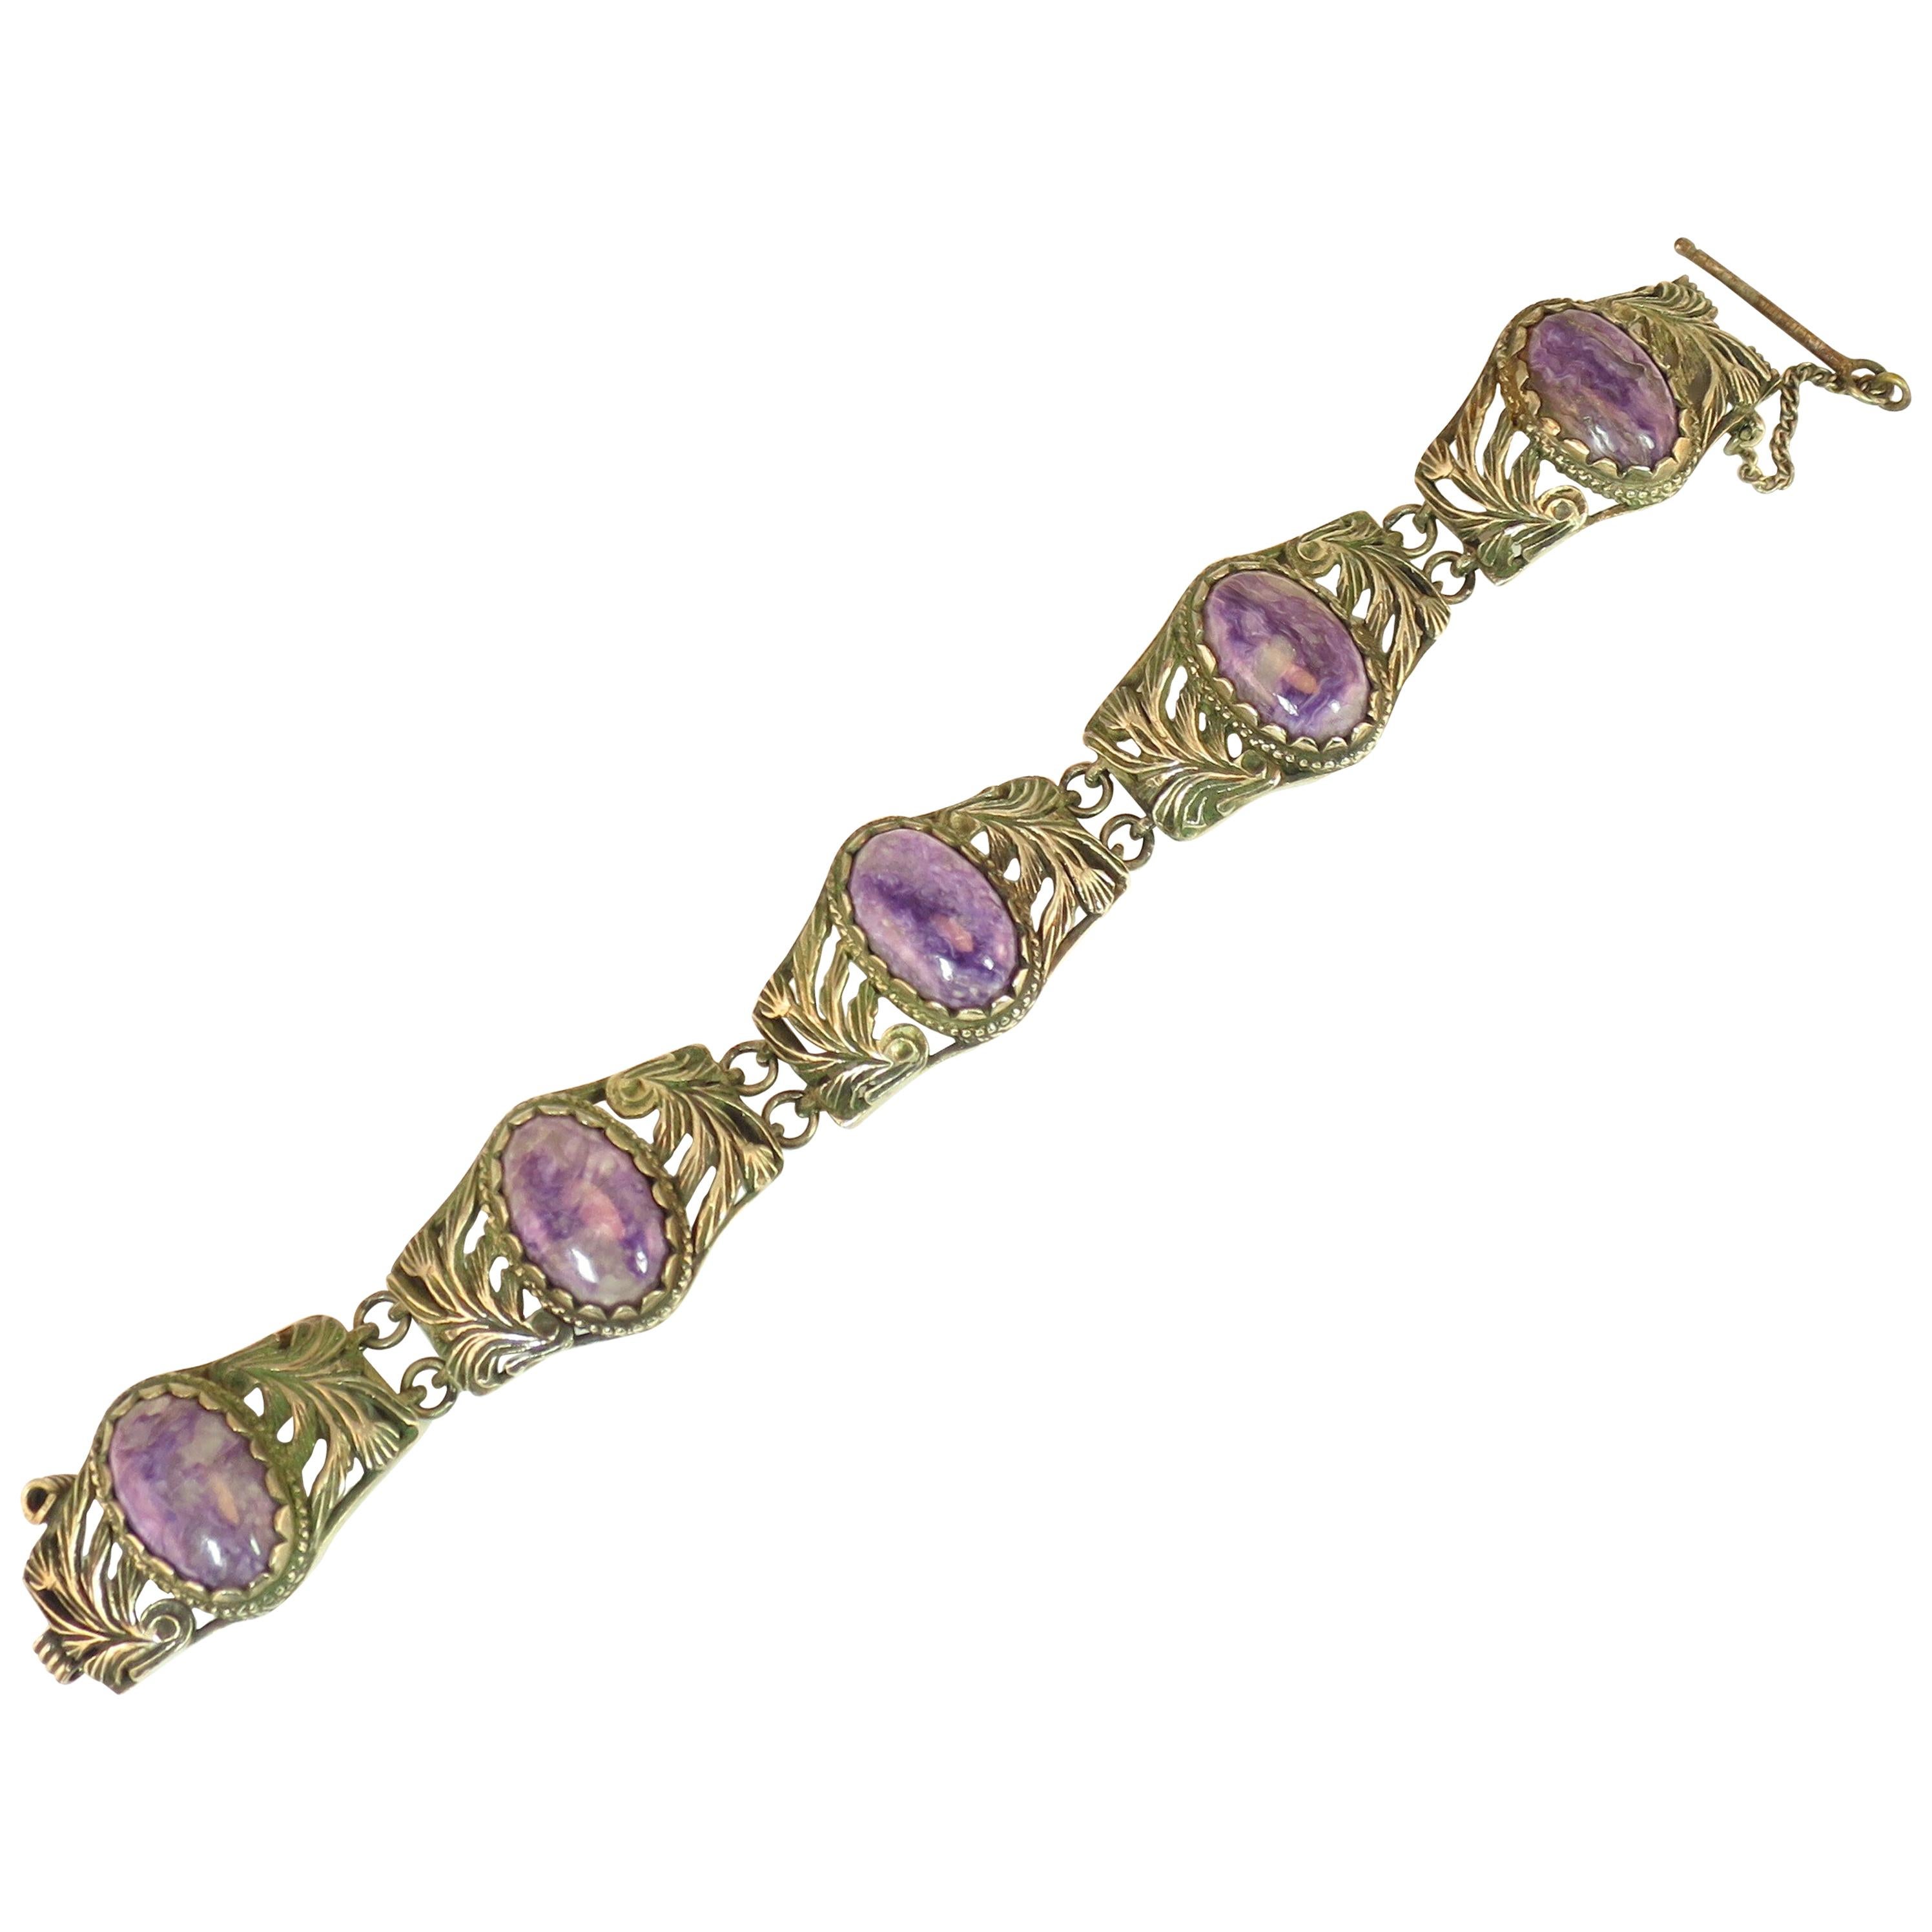 Victorian Chinese Export Silver & Amethyst Link Bracelet, Circa 1860s For Sale